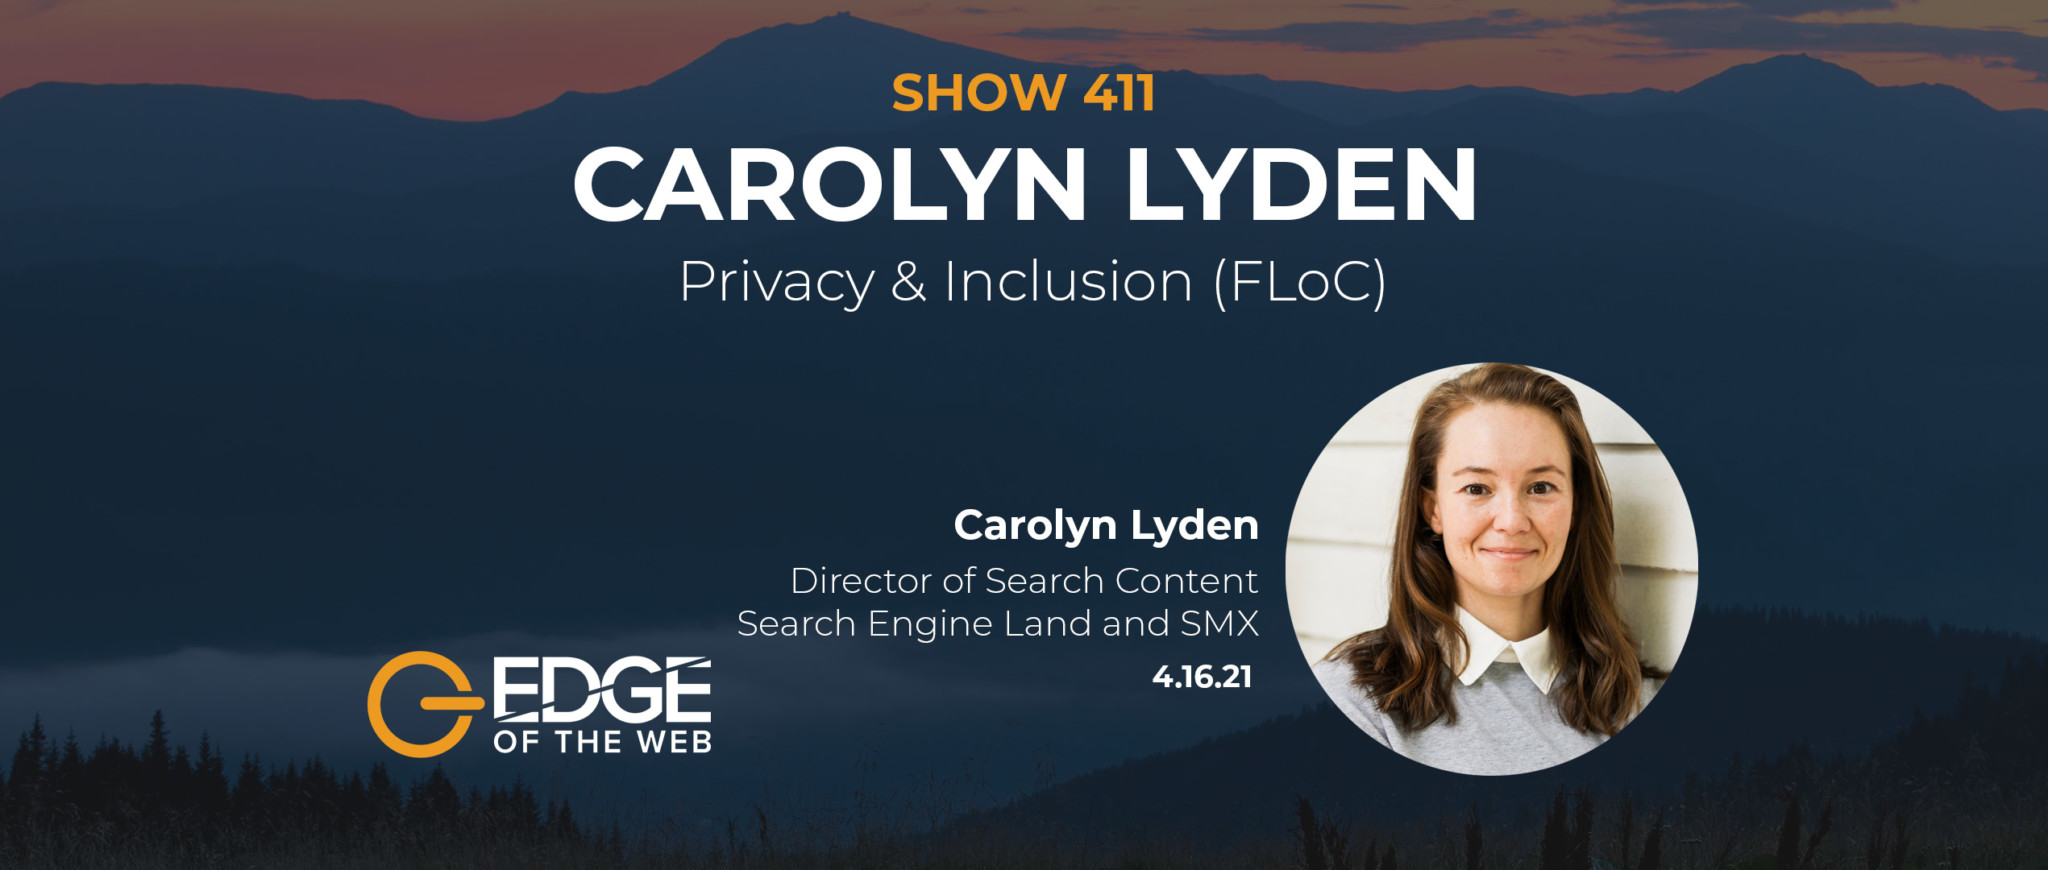 EDGE 411 Featured Image of Carolyn Lyden